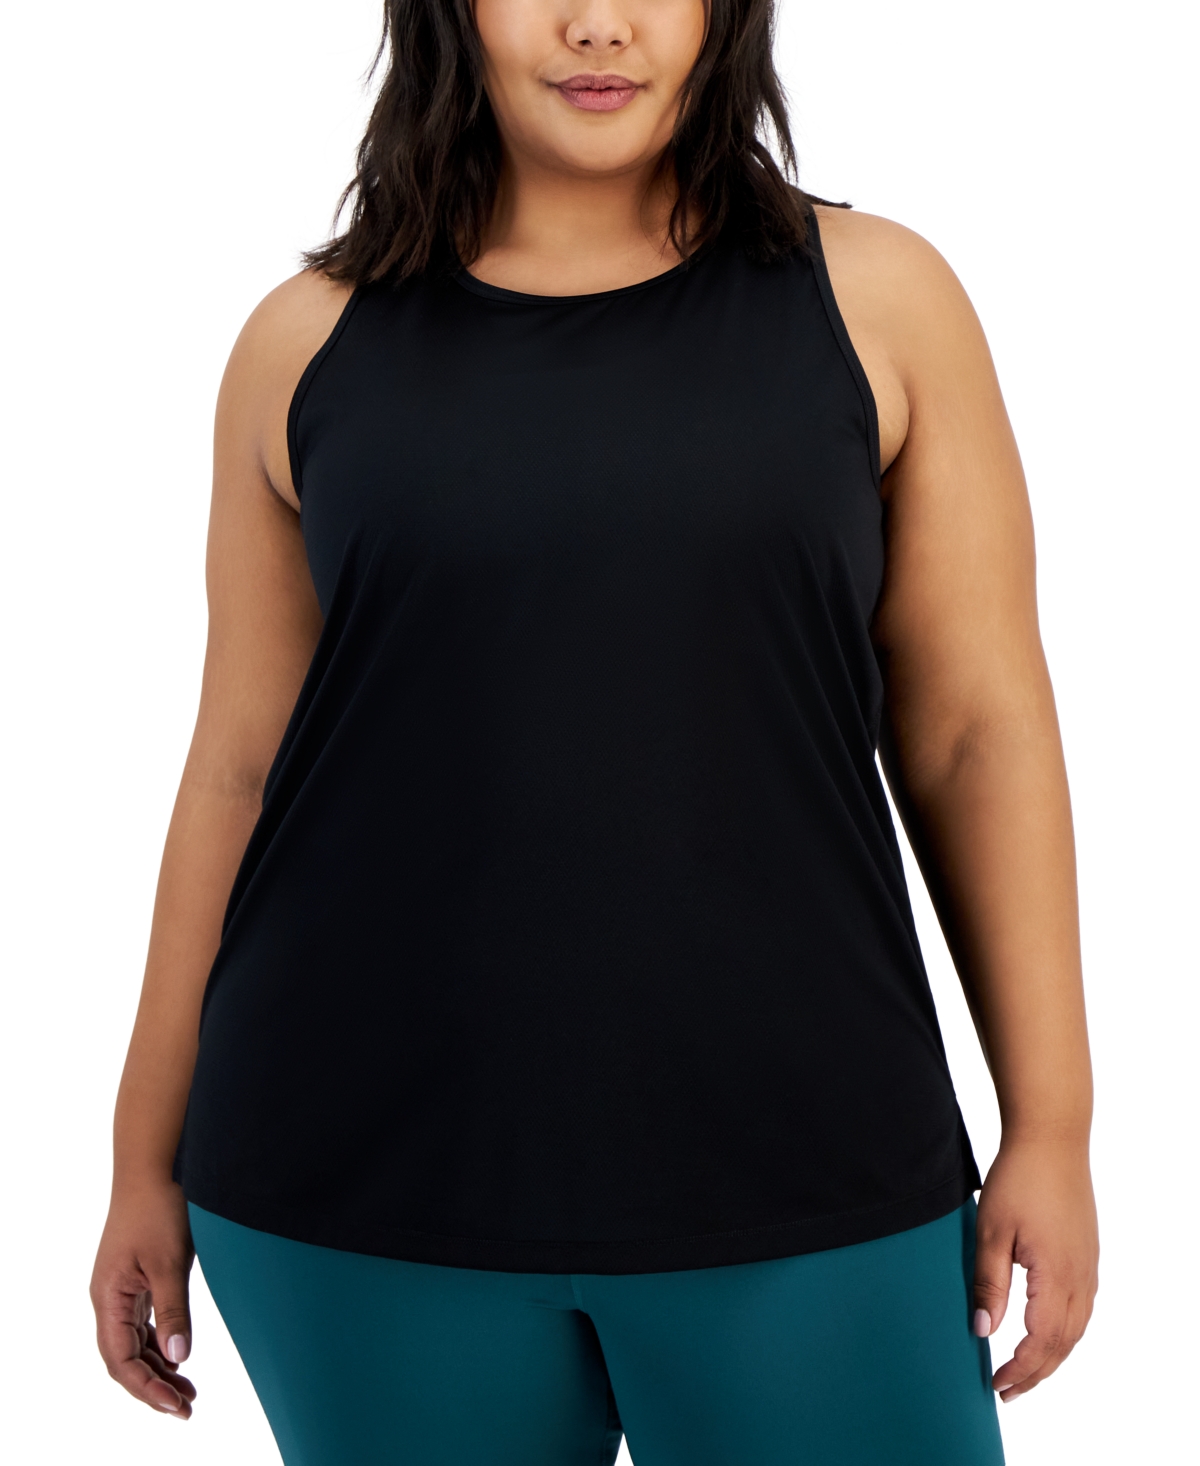 Plus Size Solid Birdseye Mesh Racerback Tank Top, Created for Macy's - Pink Icing